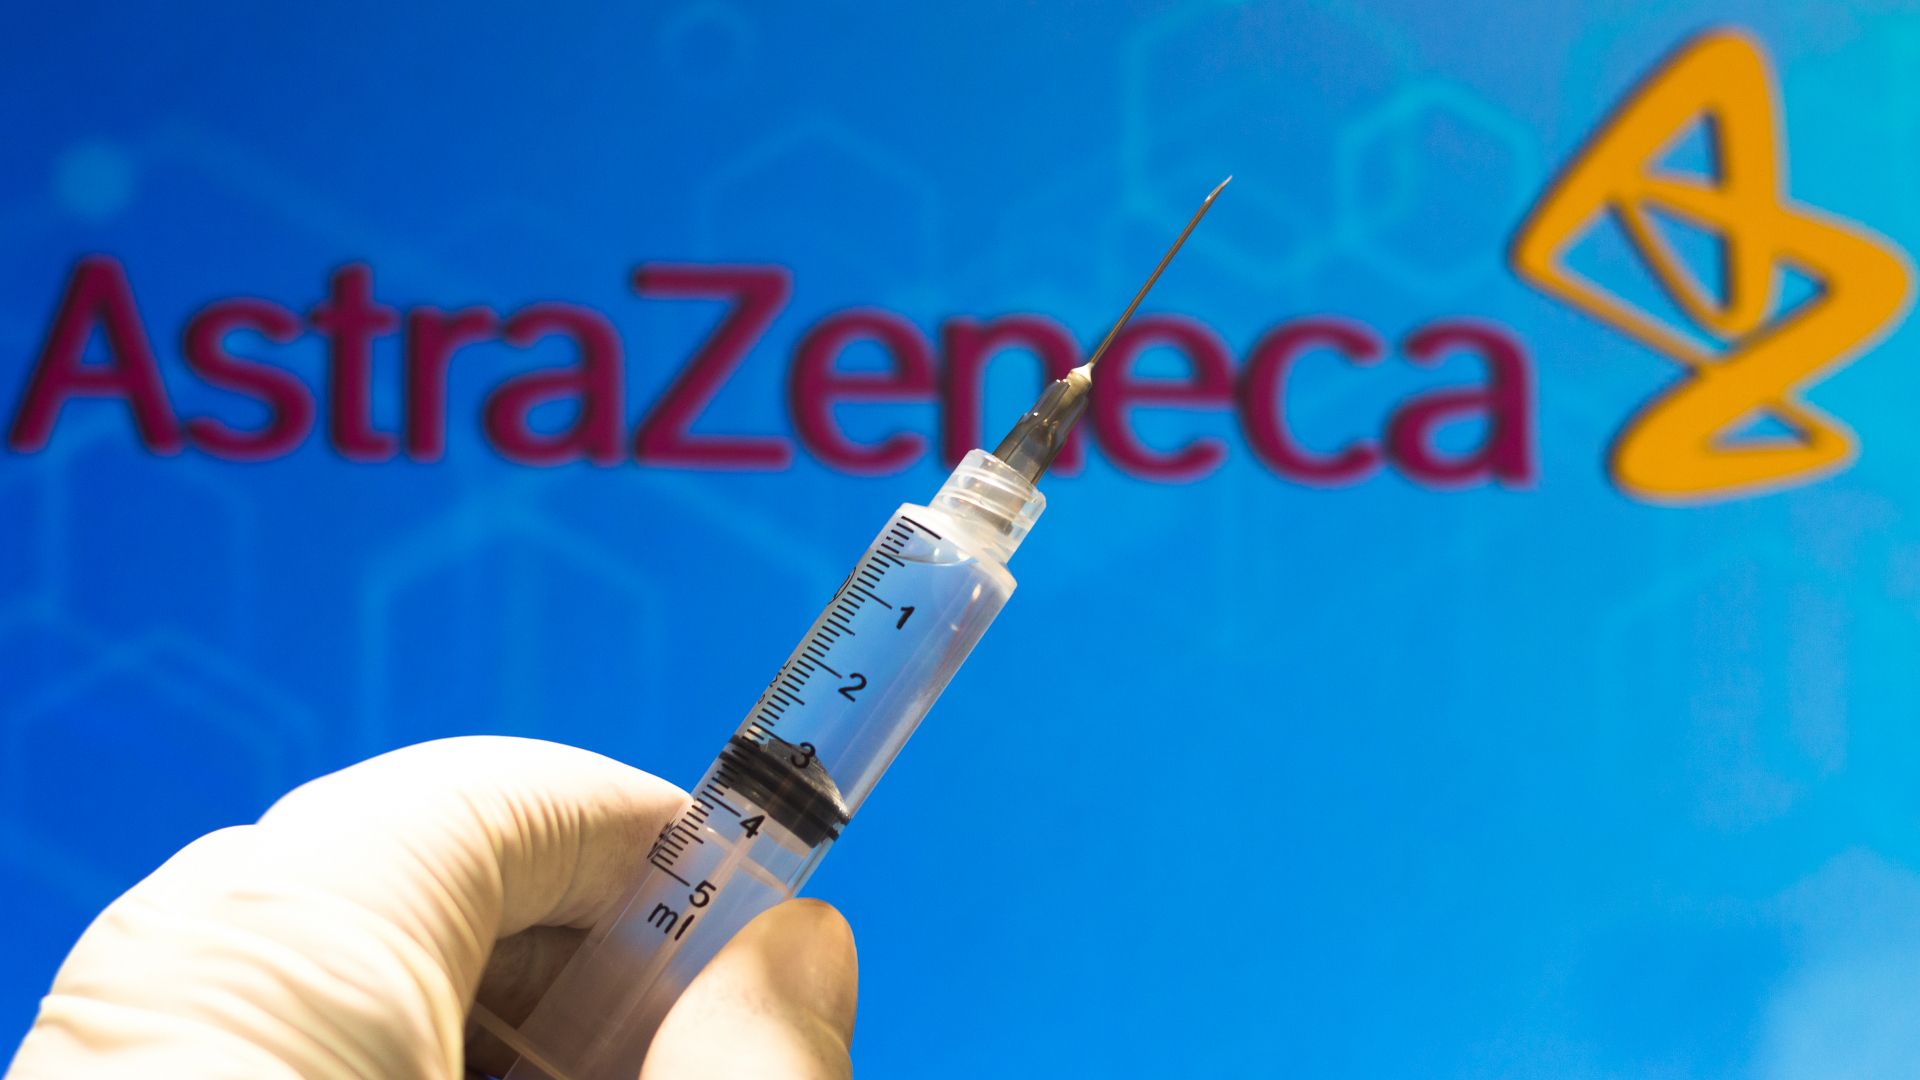 Syringe ready for vaccination in front of an AstraZeneca logo